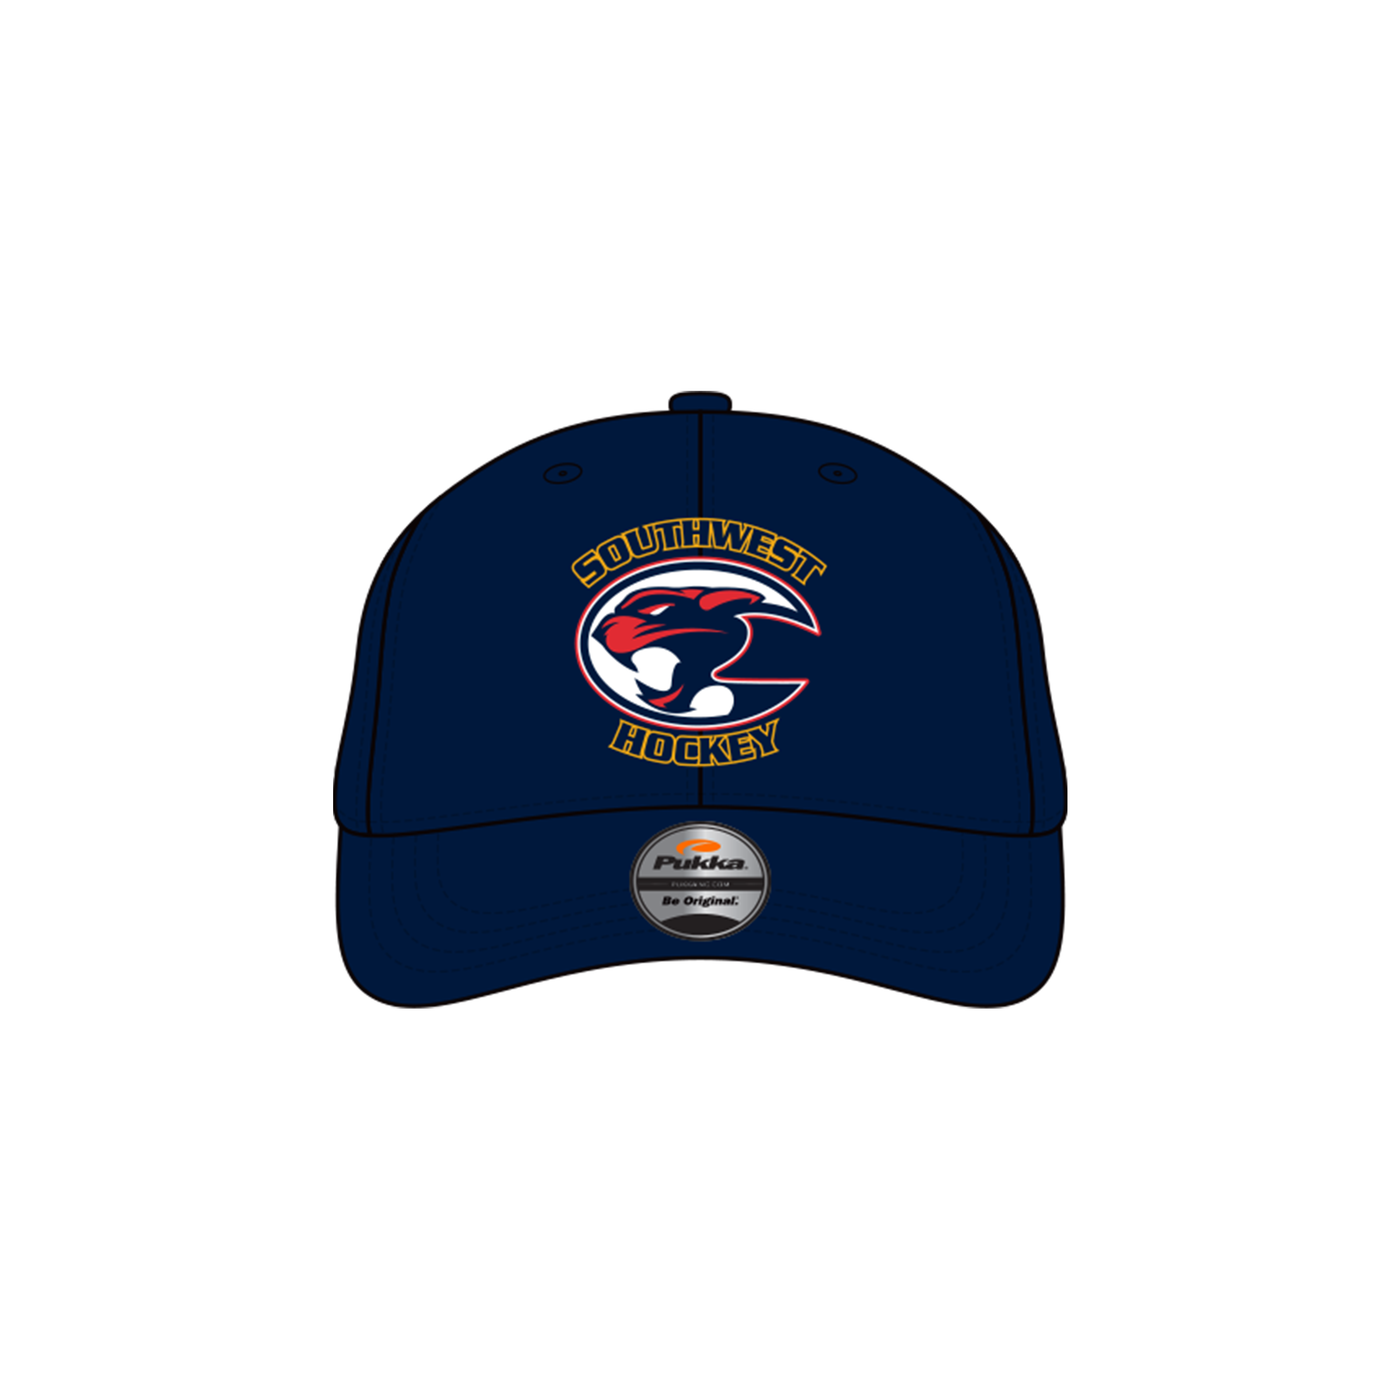 Southwest Fitted Navy Cap